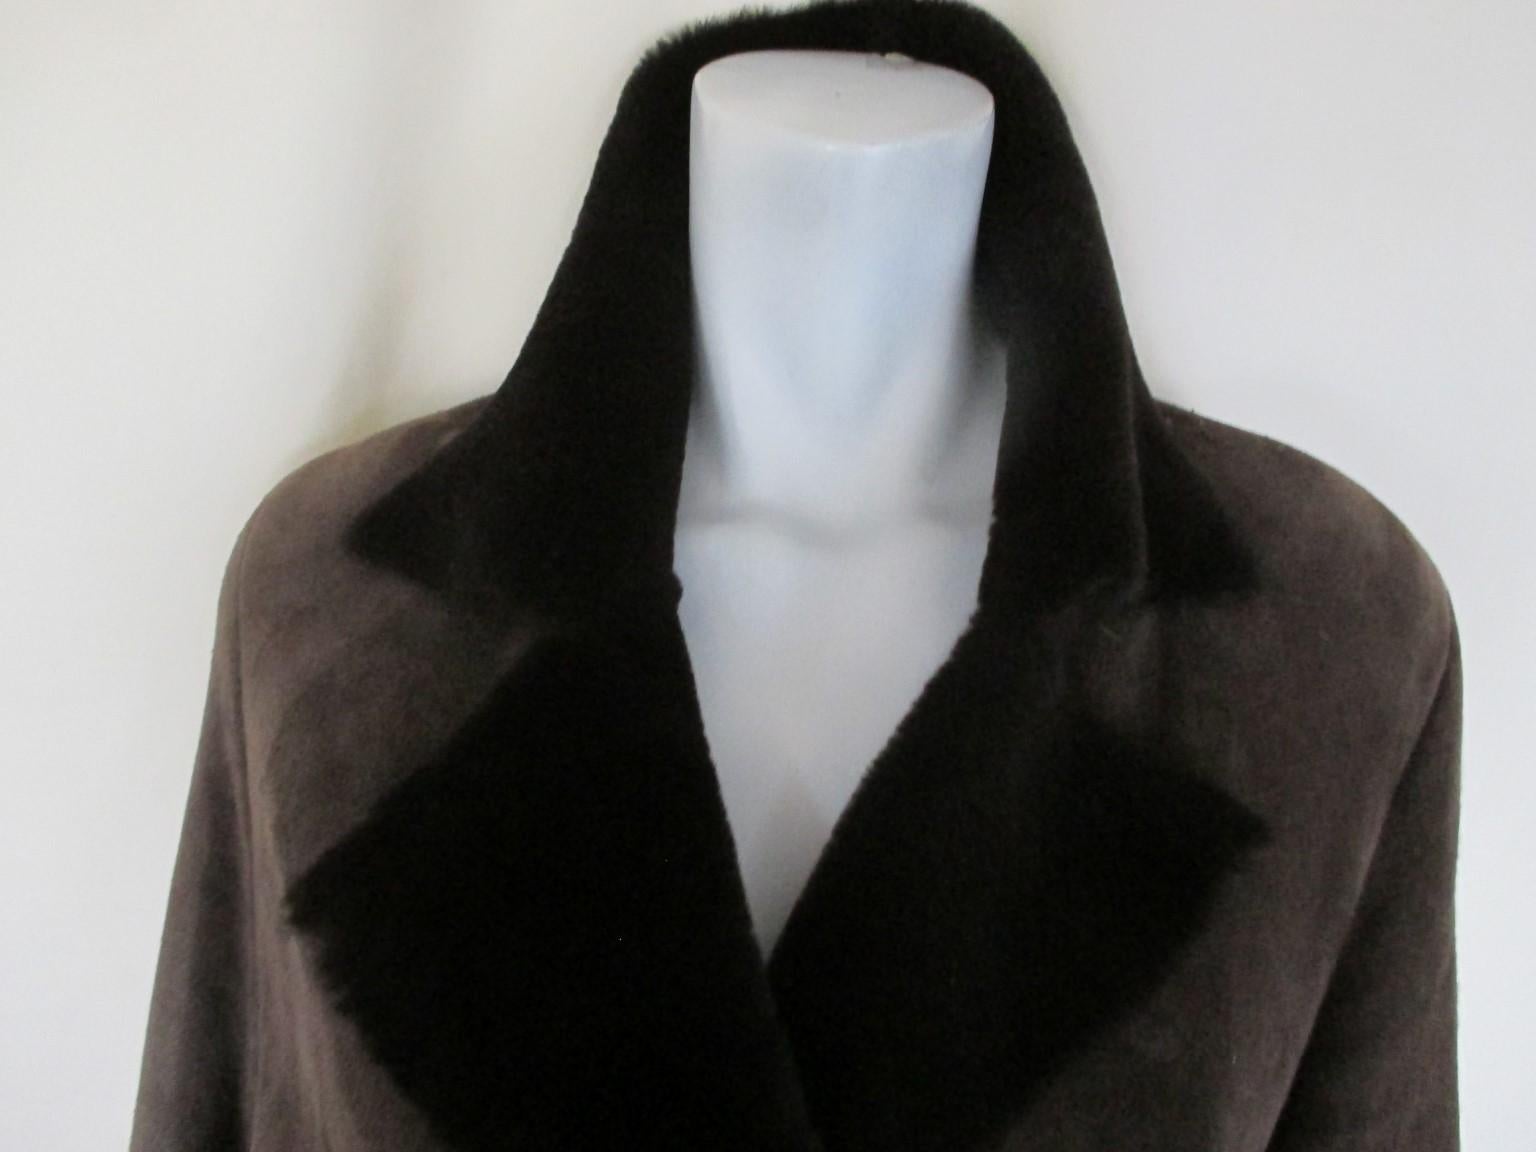 Super soft quality suede and lamb interior long coat.

We offer more lambskin and fur items, see our frontstore.

Details:
It has 2 pockets, 1 inside button and 3 closing hooks.
Sleeves can be roll up and down
Light-weight
Color is brown
From the